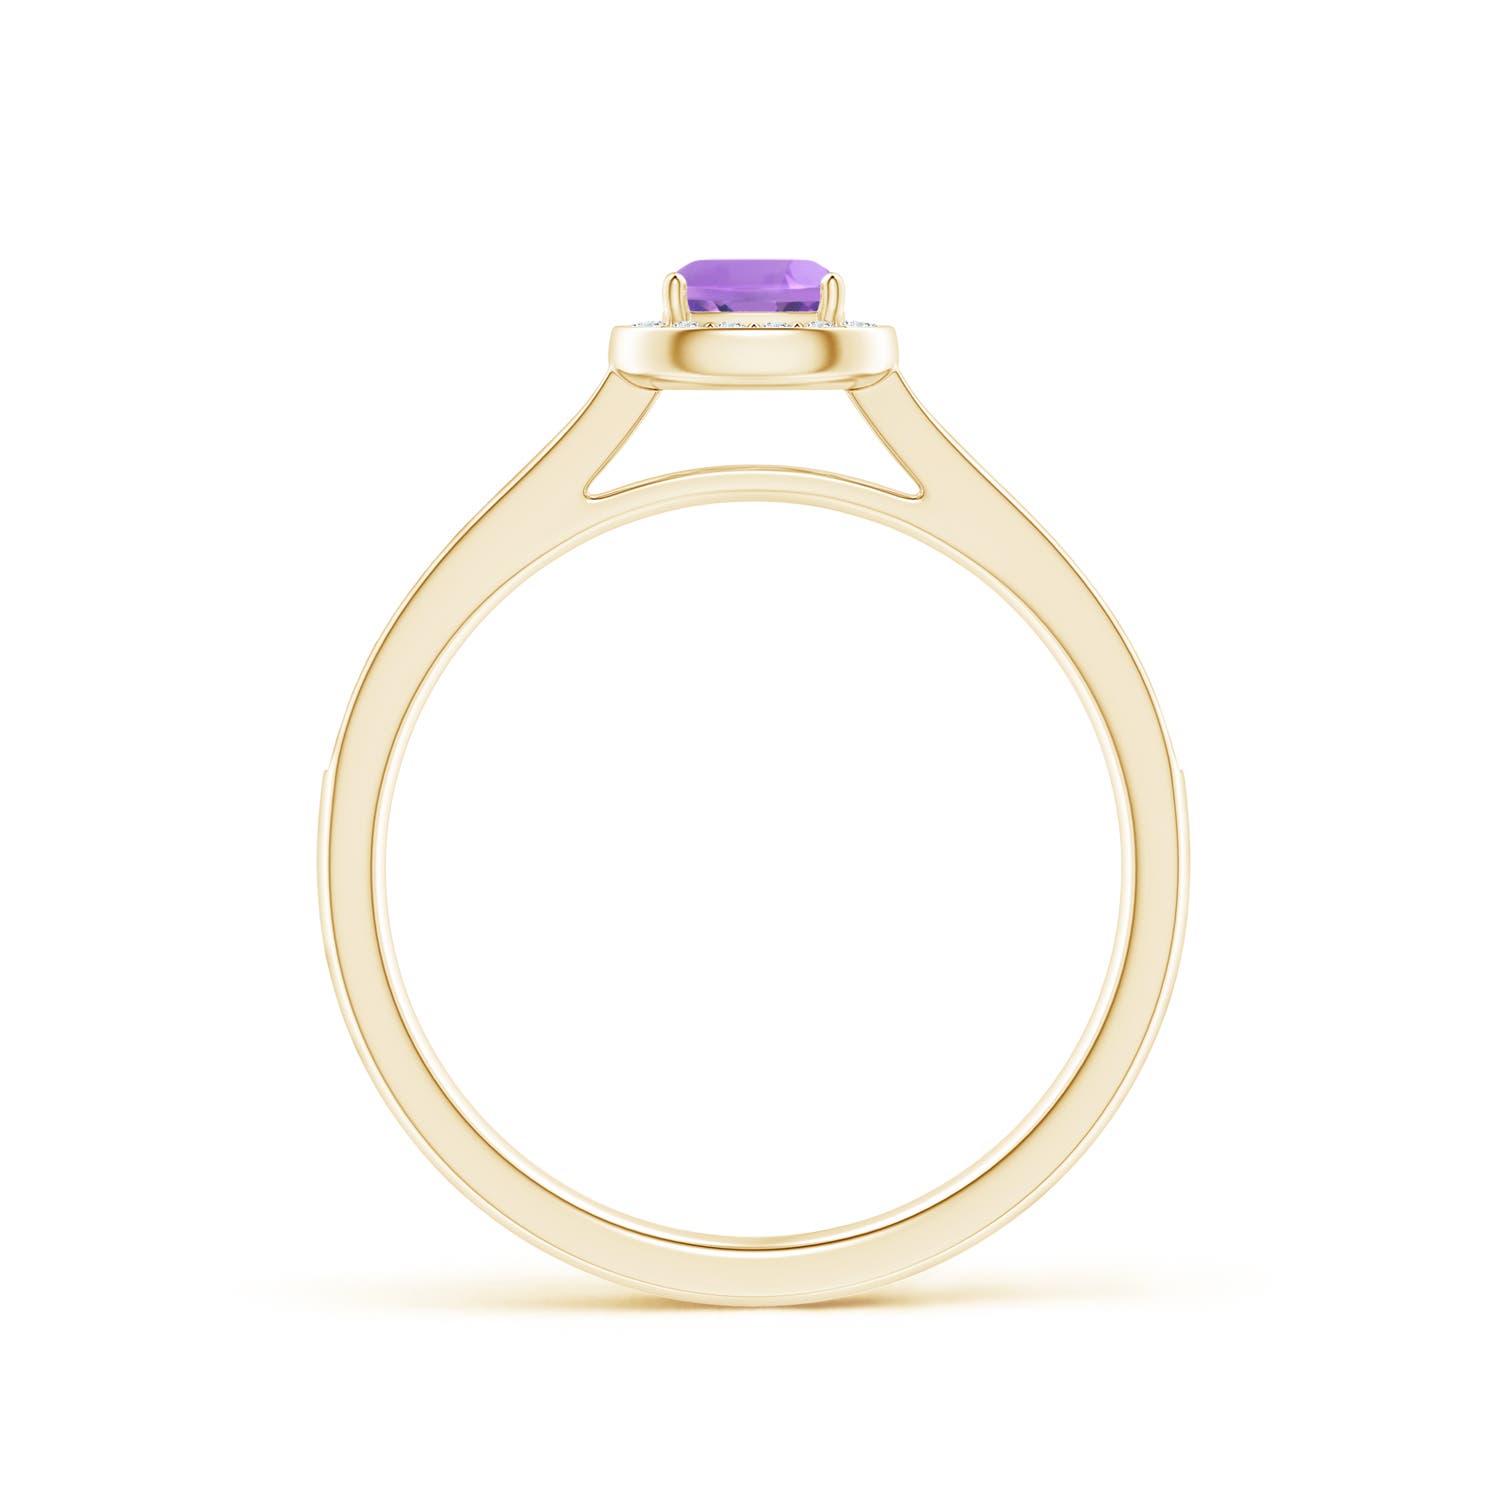 A - Amethyst / 0.49 CT / 14 KT Yellow Gold